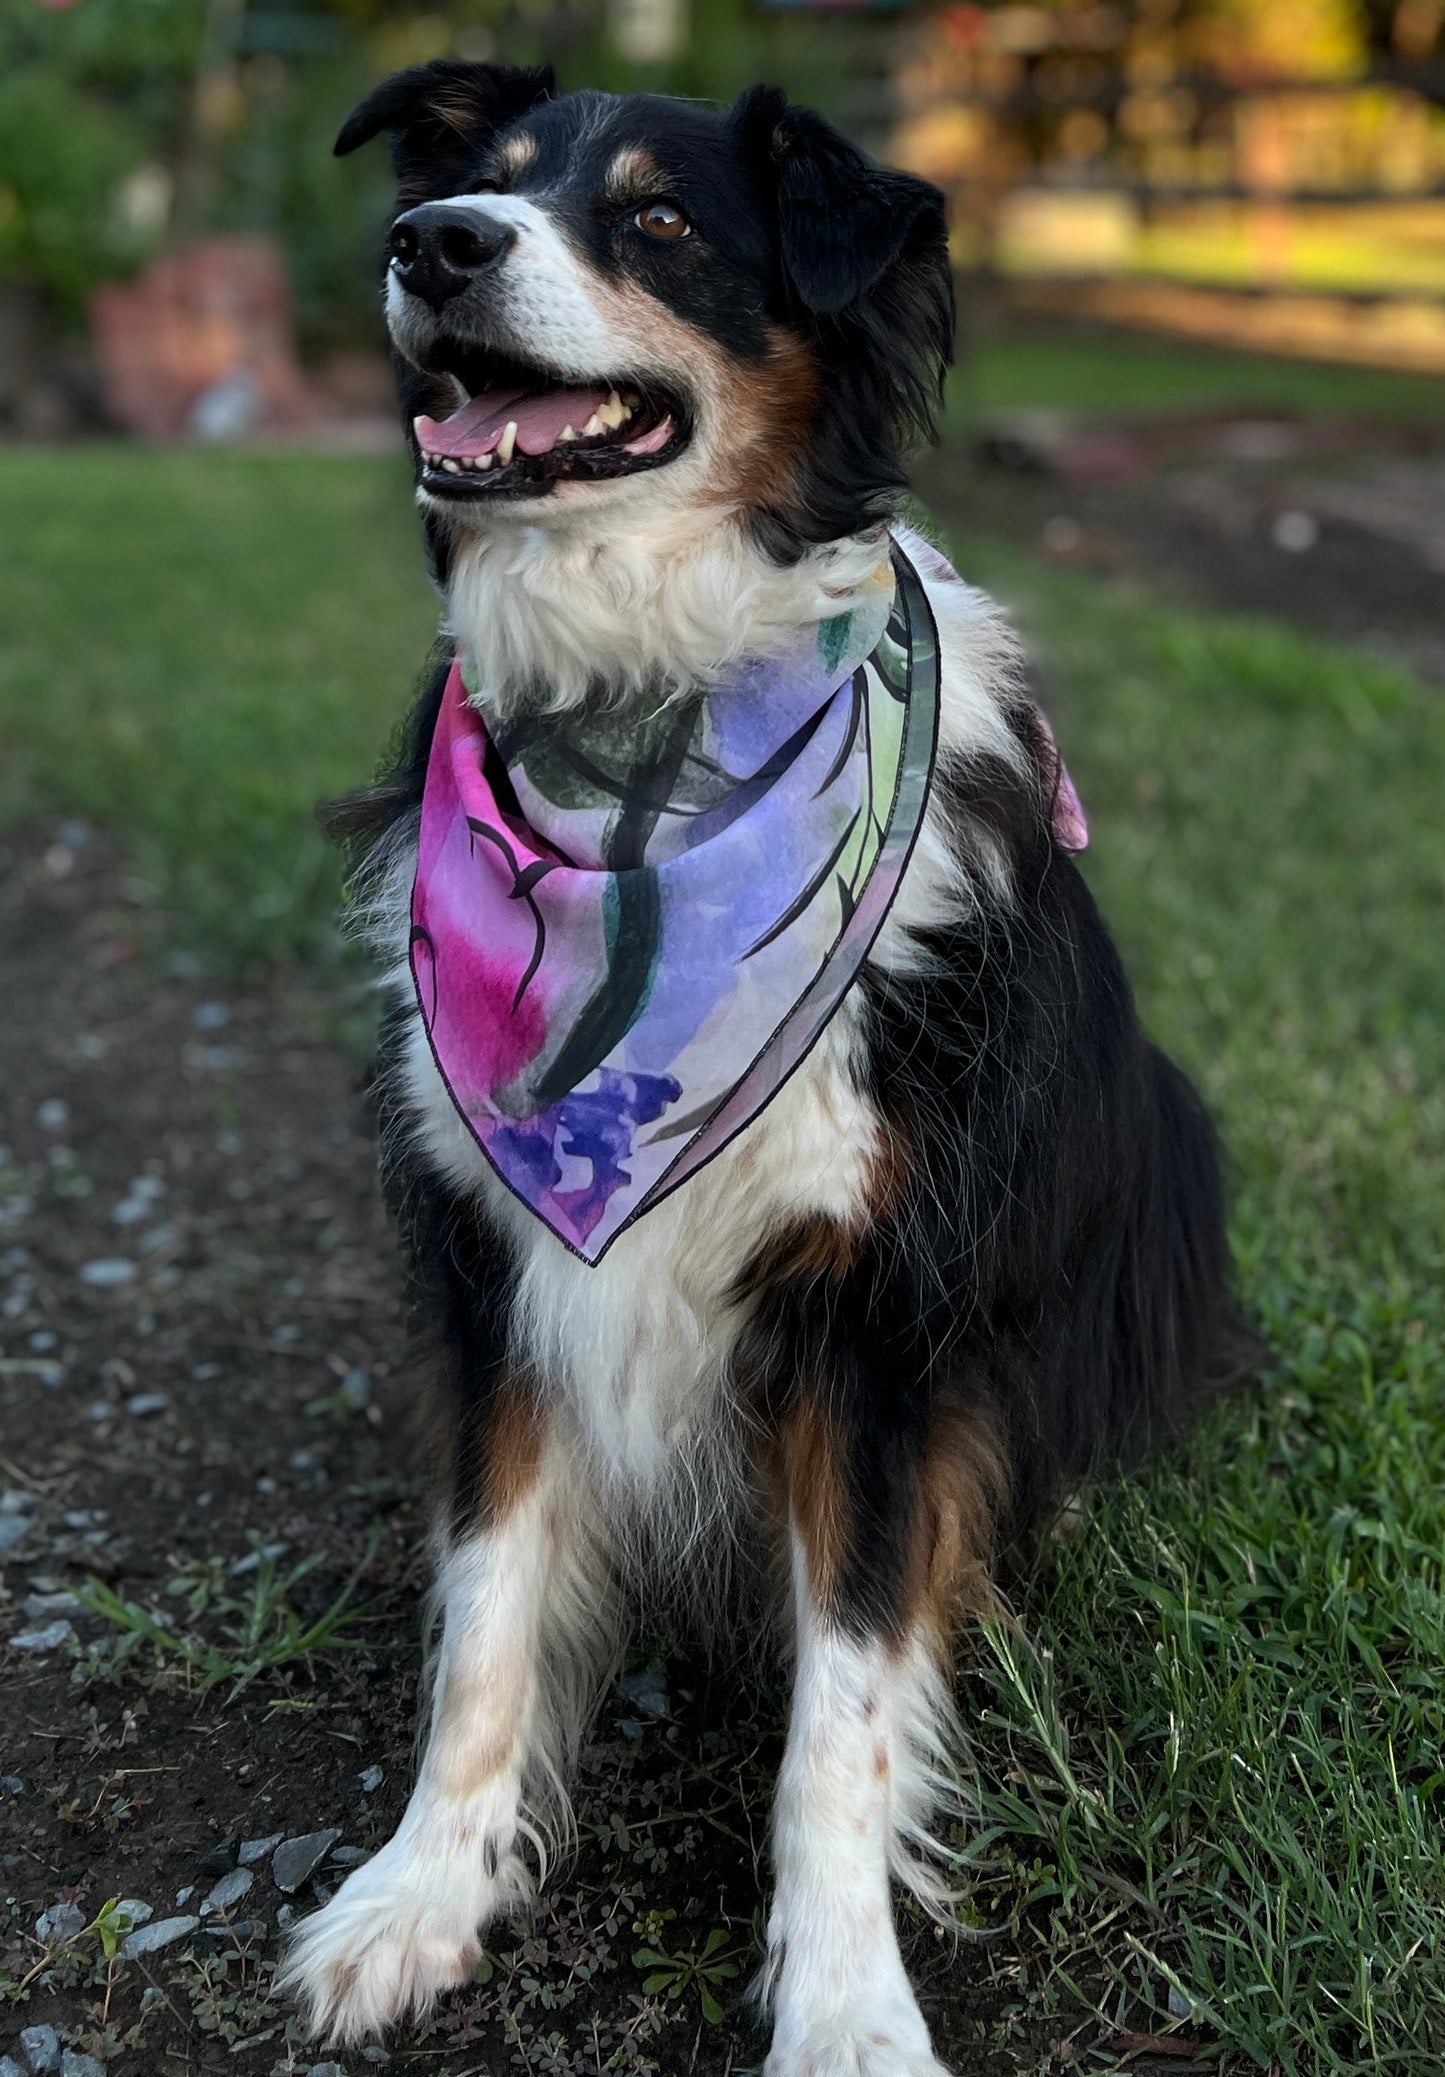  painted this gorgeous watercolor scarf entitled "Mimi" named after a dear friend that is made from vegan georgette fabric that feels like silk. The colors are vibrant and bold. Sophisticated and elegant, these scarves are made from vegan georgette fabric that feels like silk, but with more durability. perfect for human or dogs! 